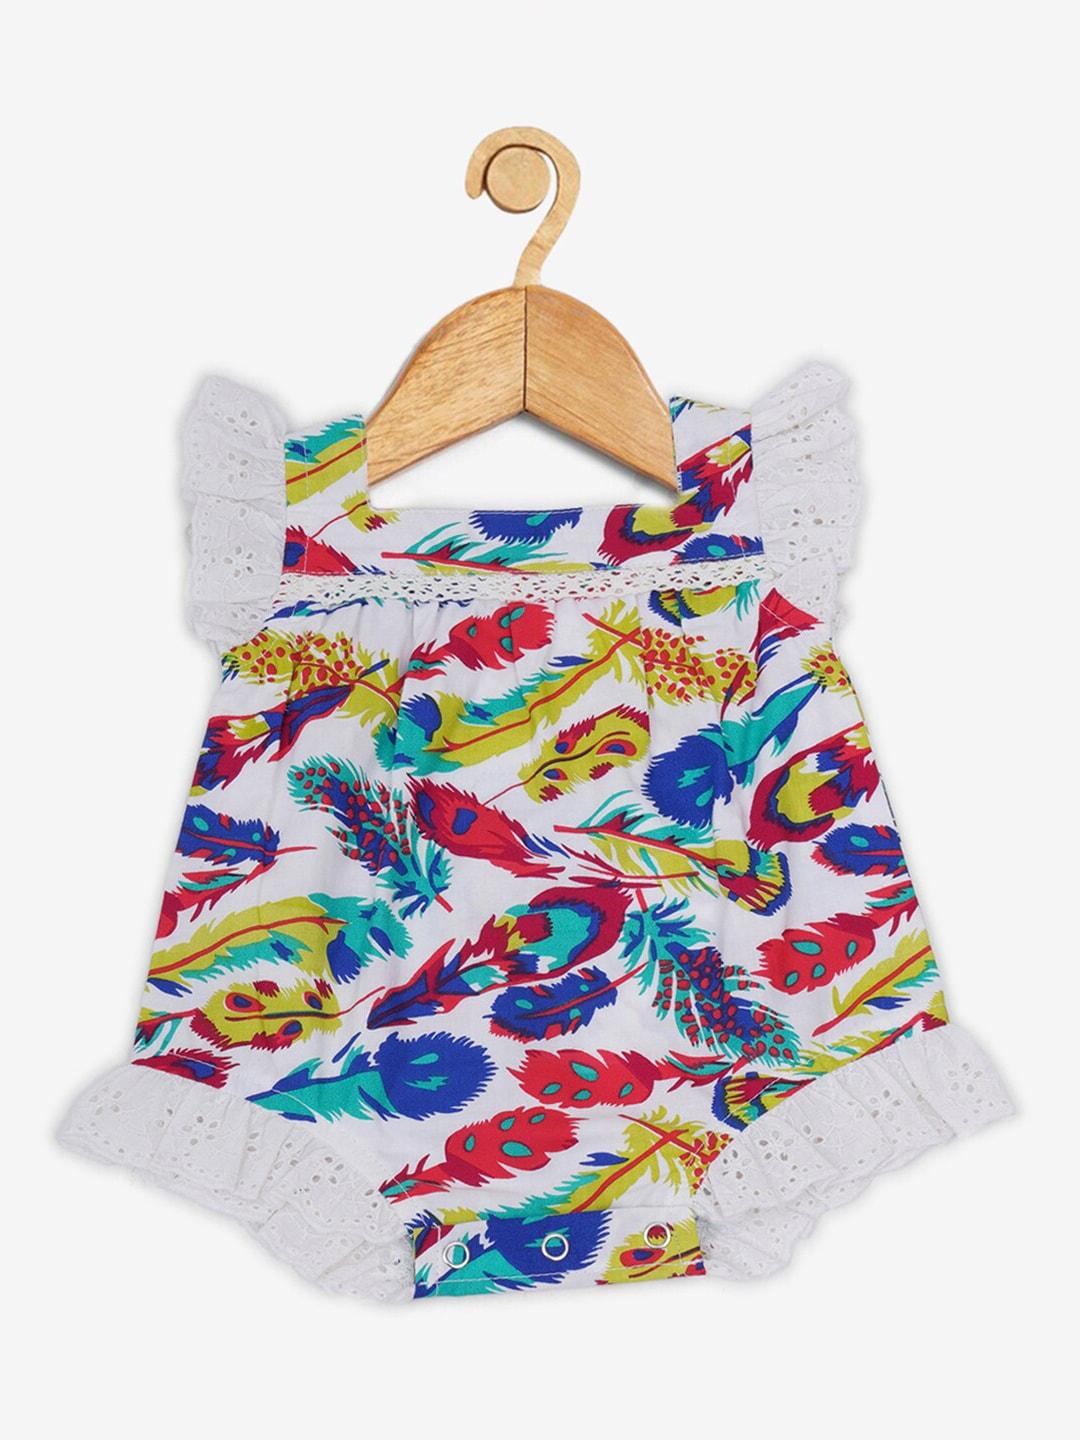 Creative Kids Girls Feather Printed Cotton Rompers